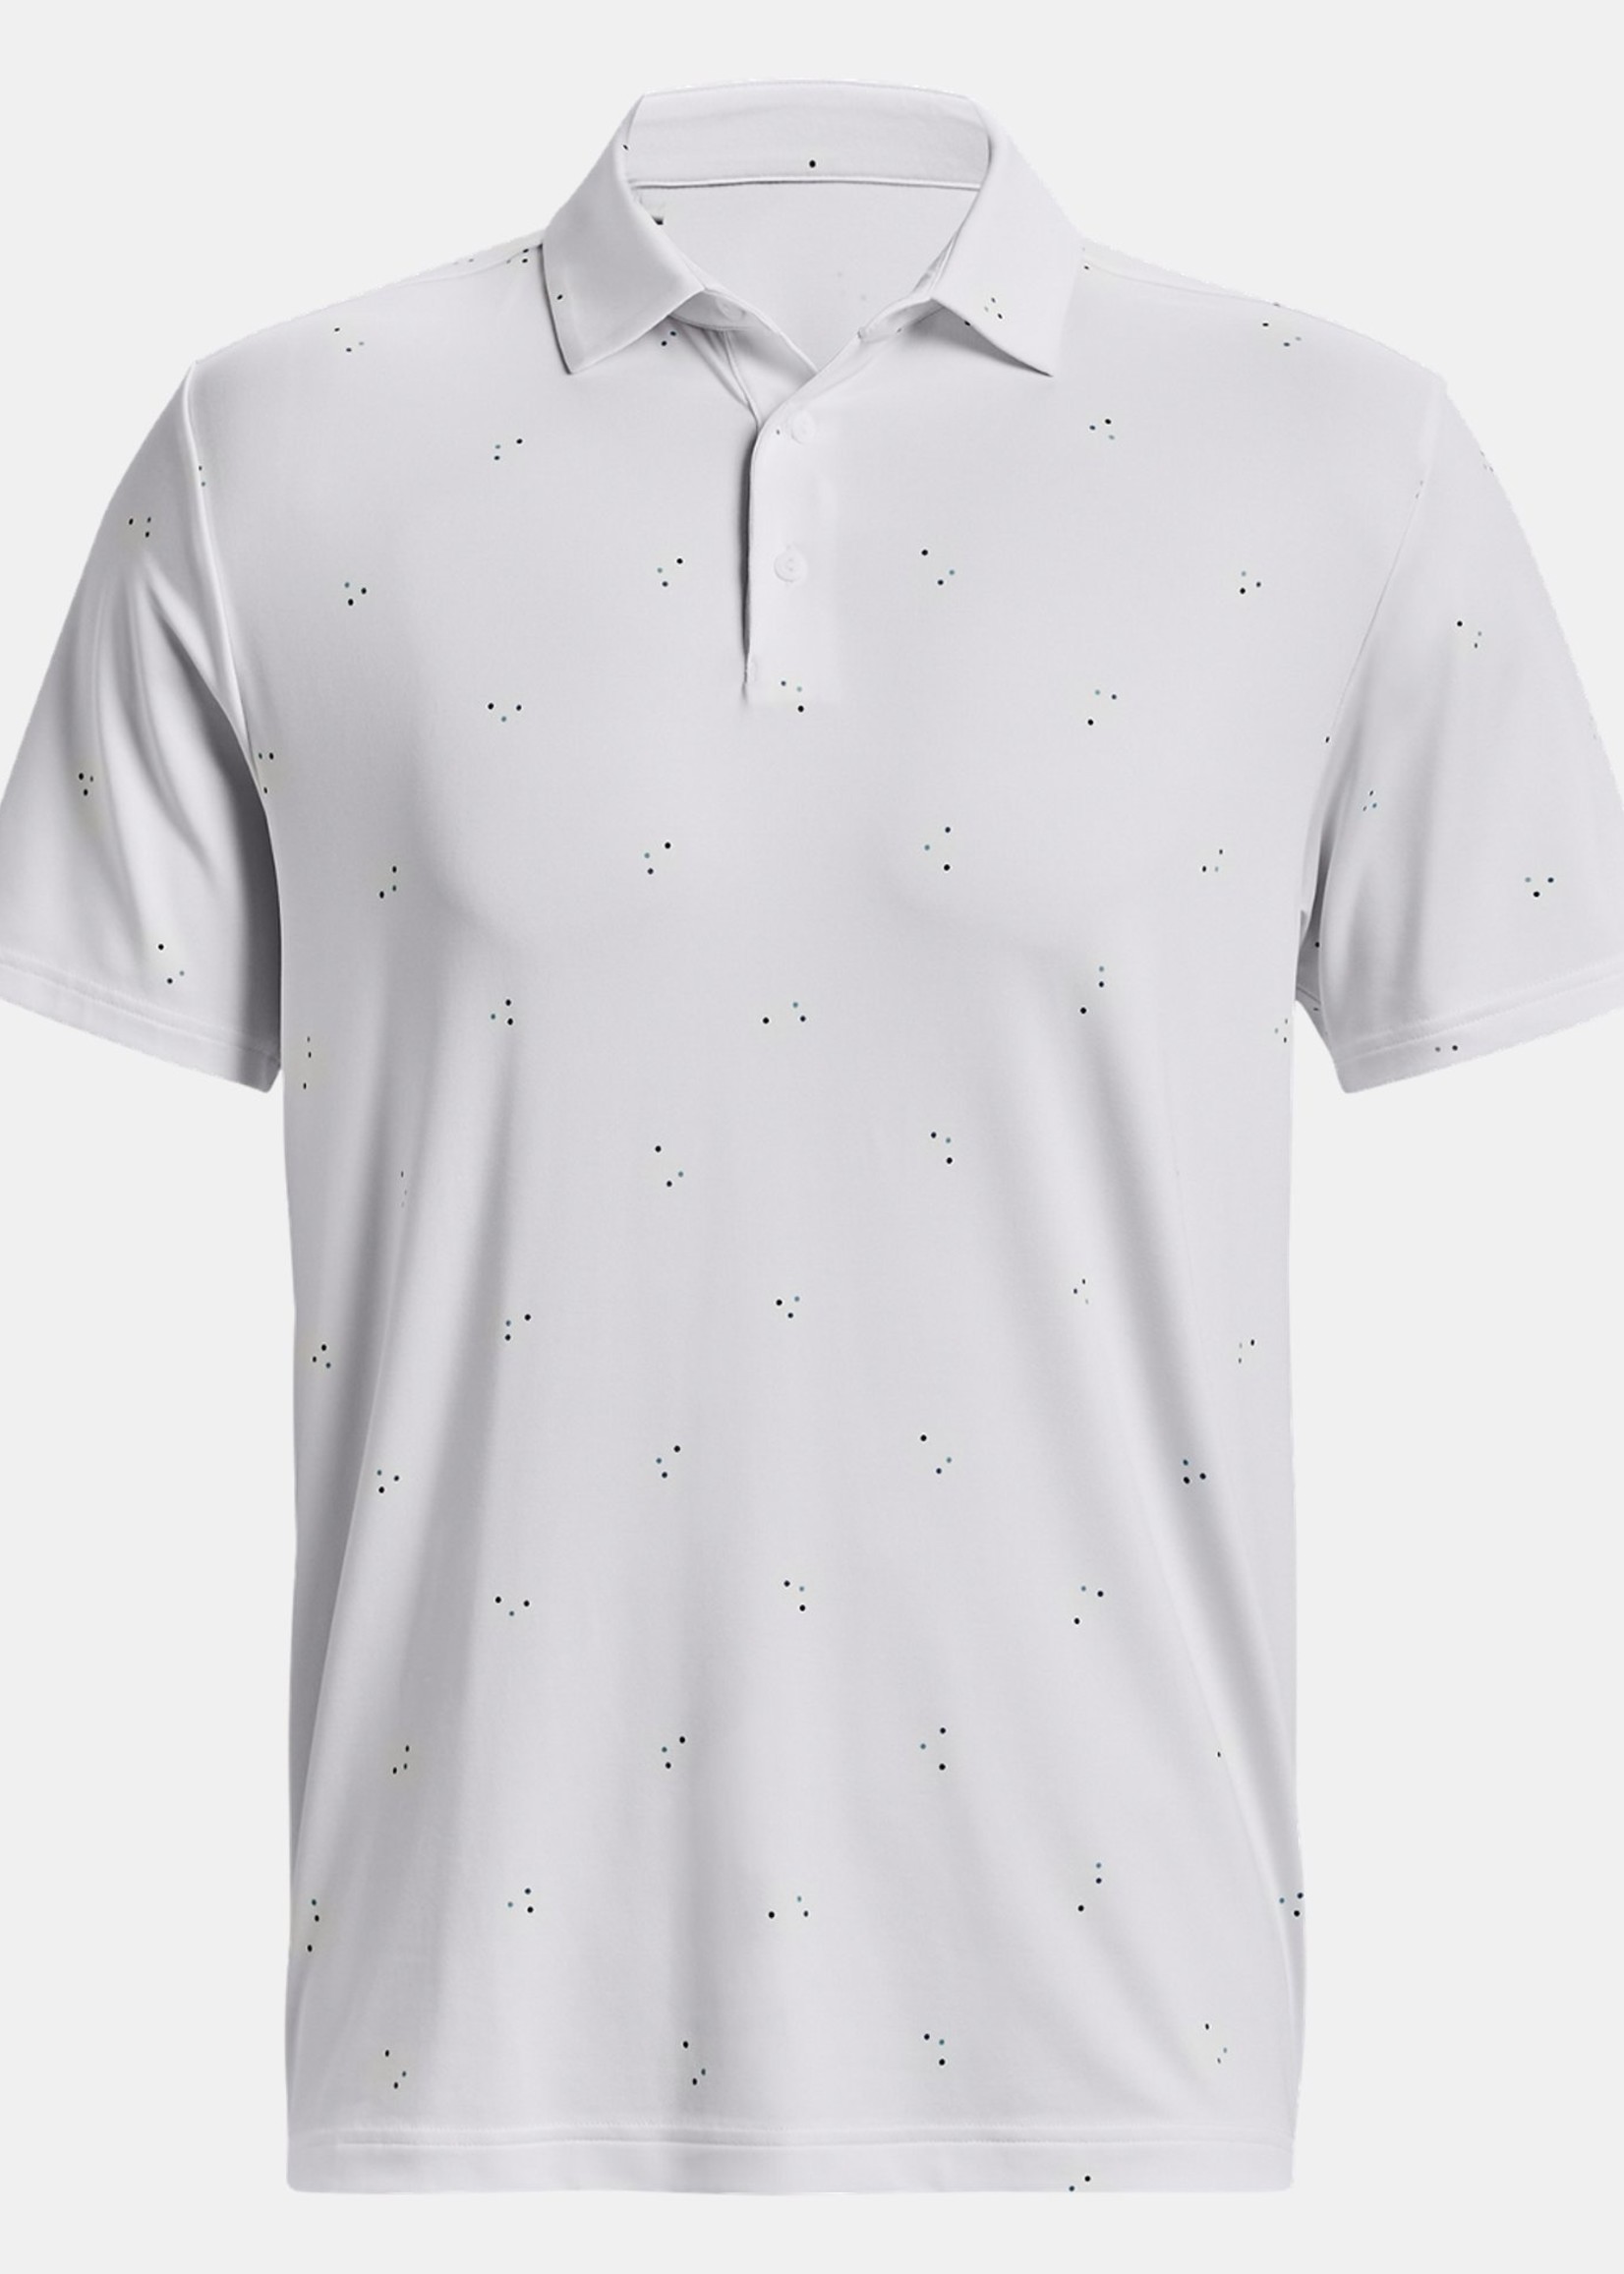 Under Armour Playoff 3.0 Polo